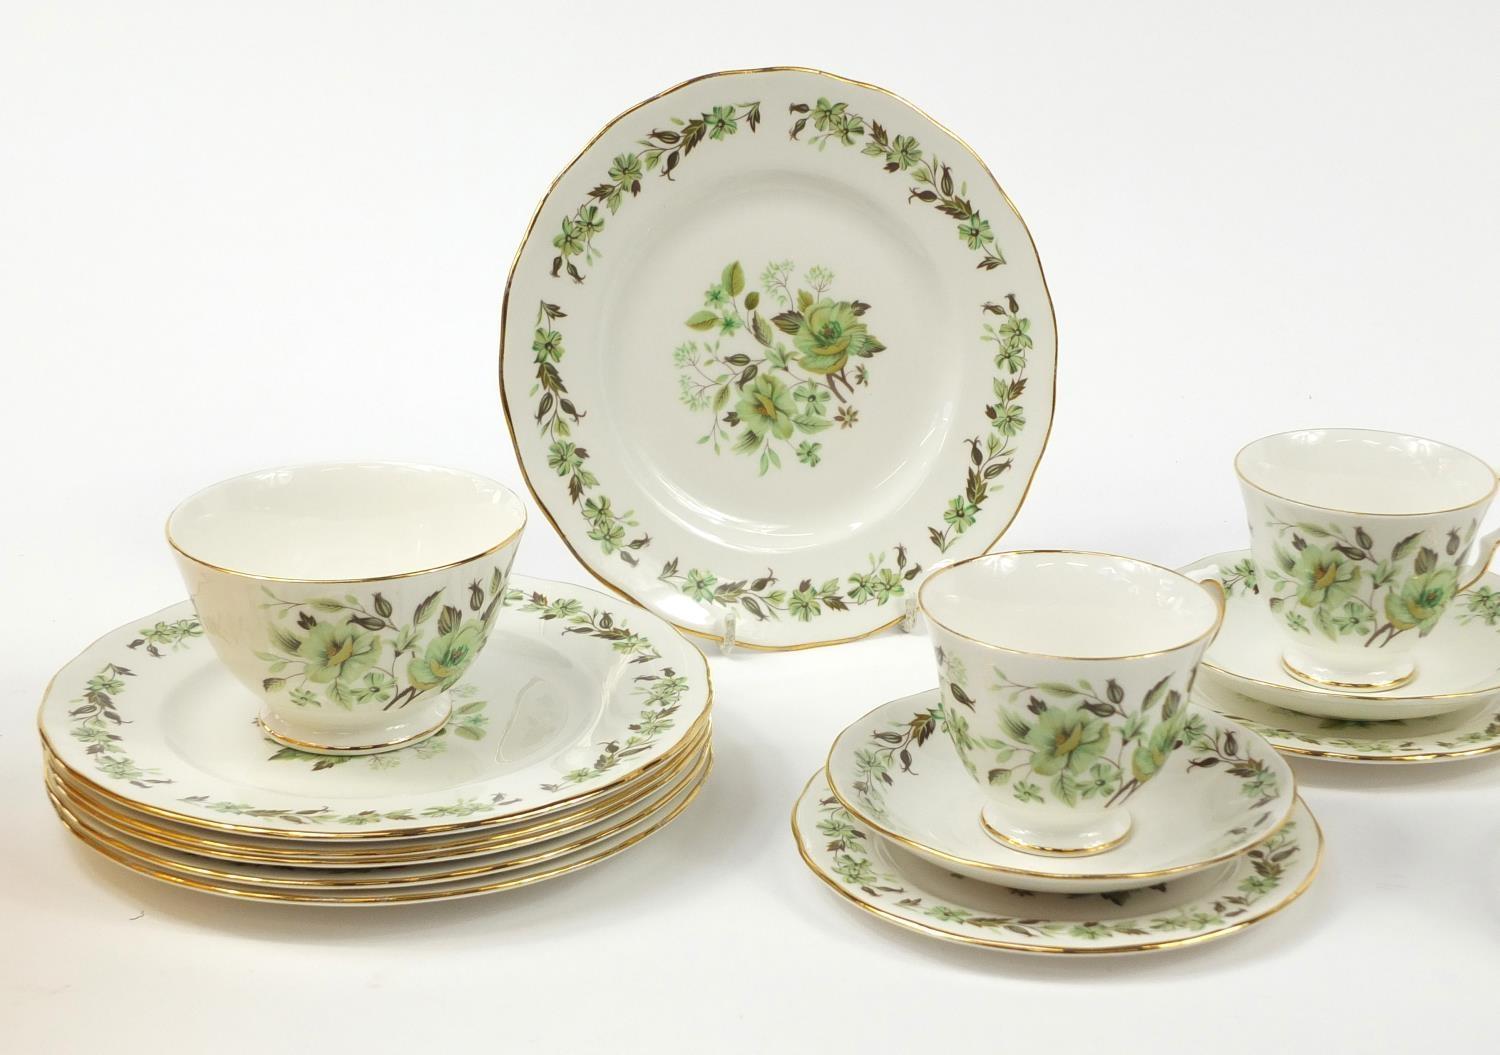 Colclough six place tea service decorated with flowers, each cup 7cm high - Image 2 of 25